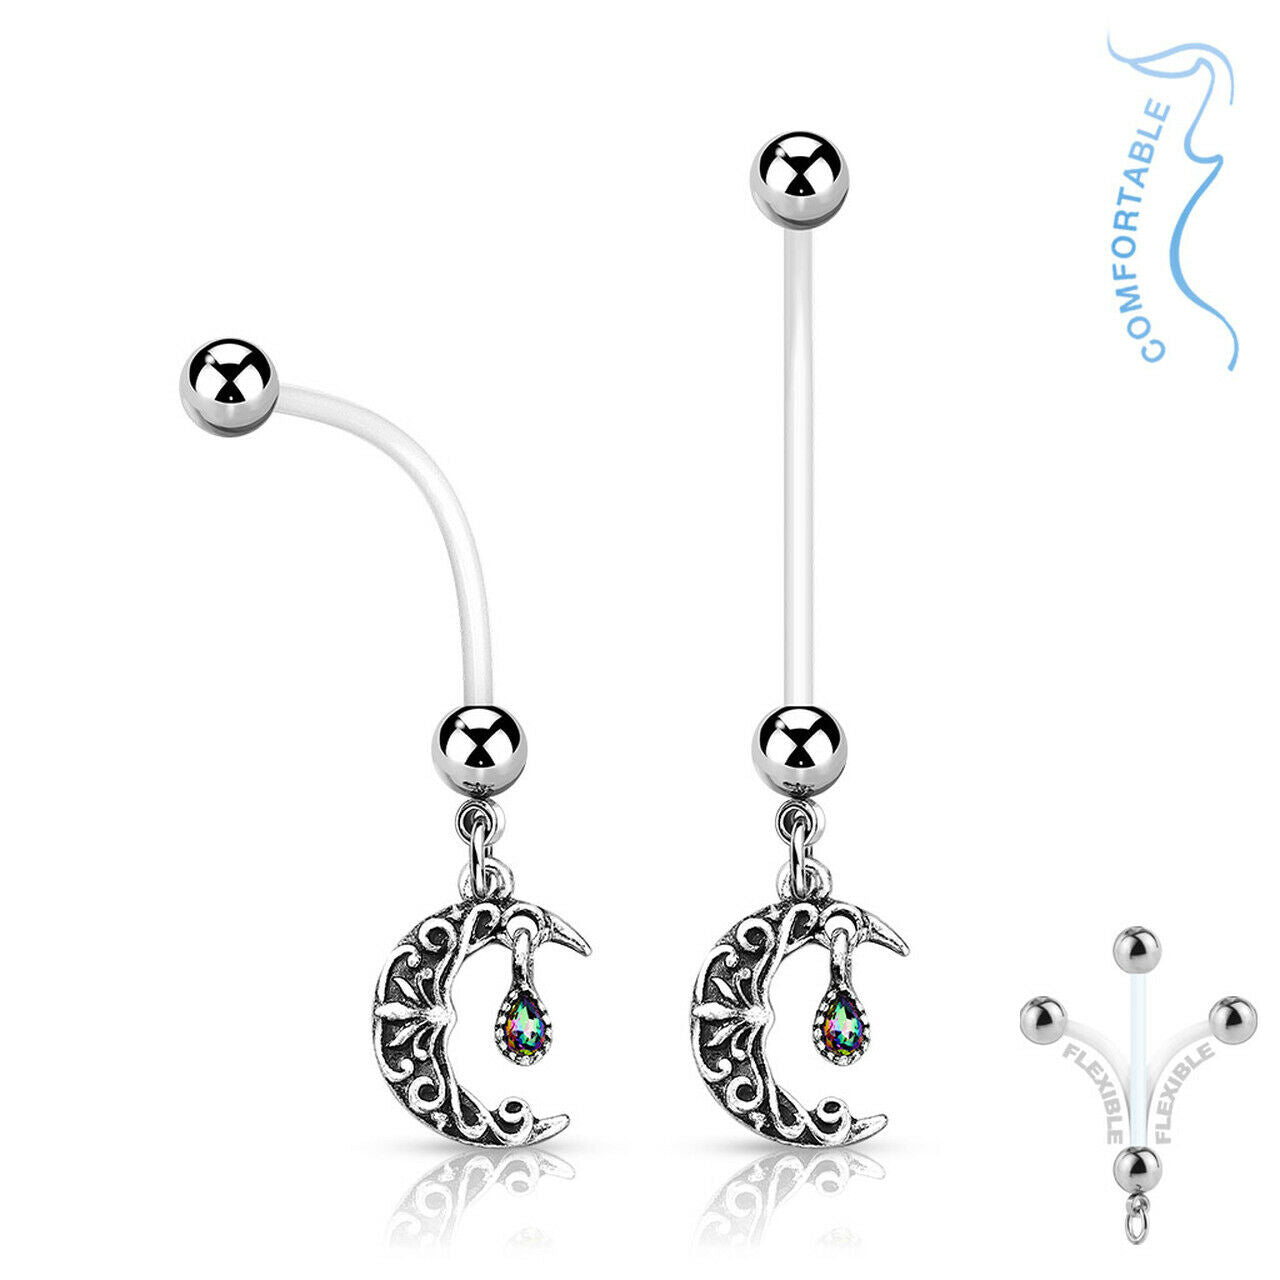 Pregnancy Belly Naval Ring Bioflex with Crescent Moon Surgical Steel Balls